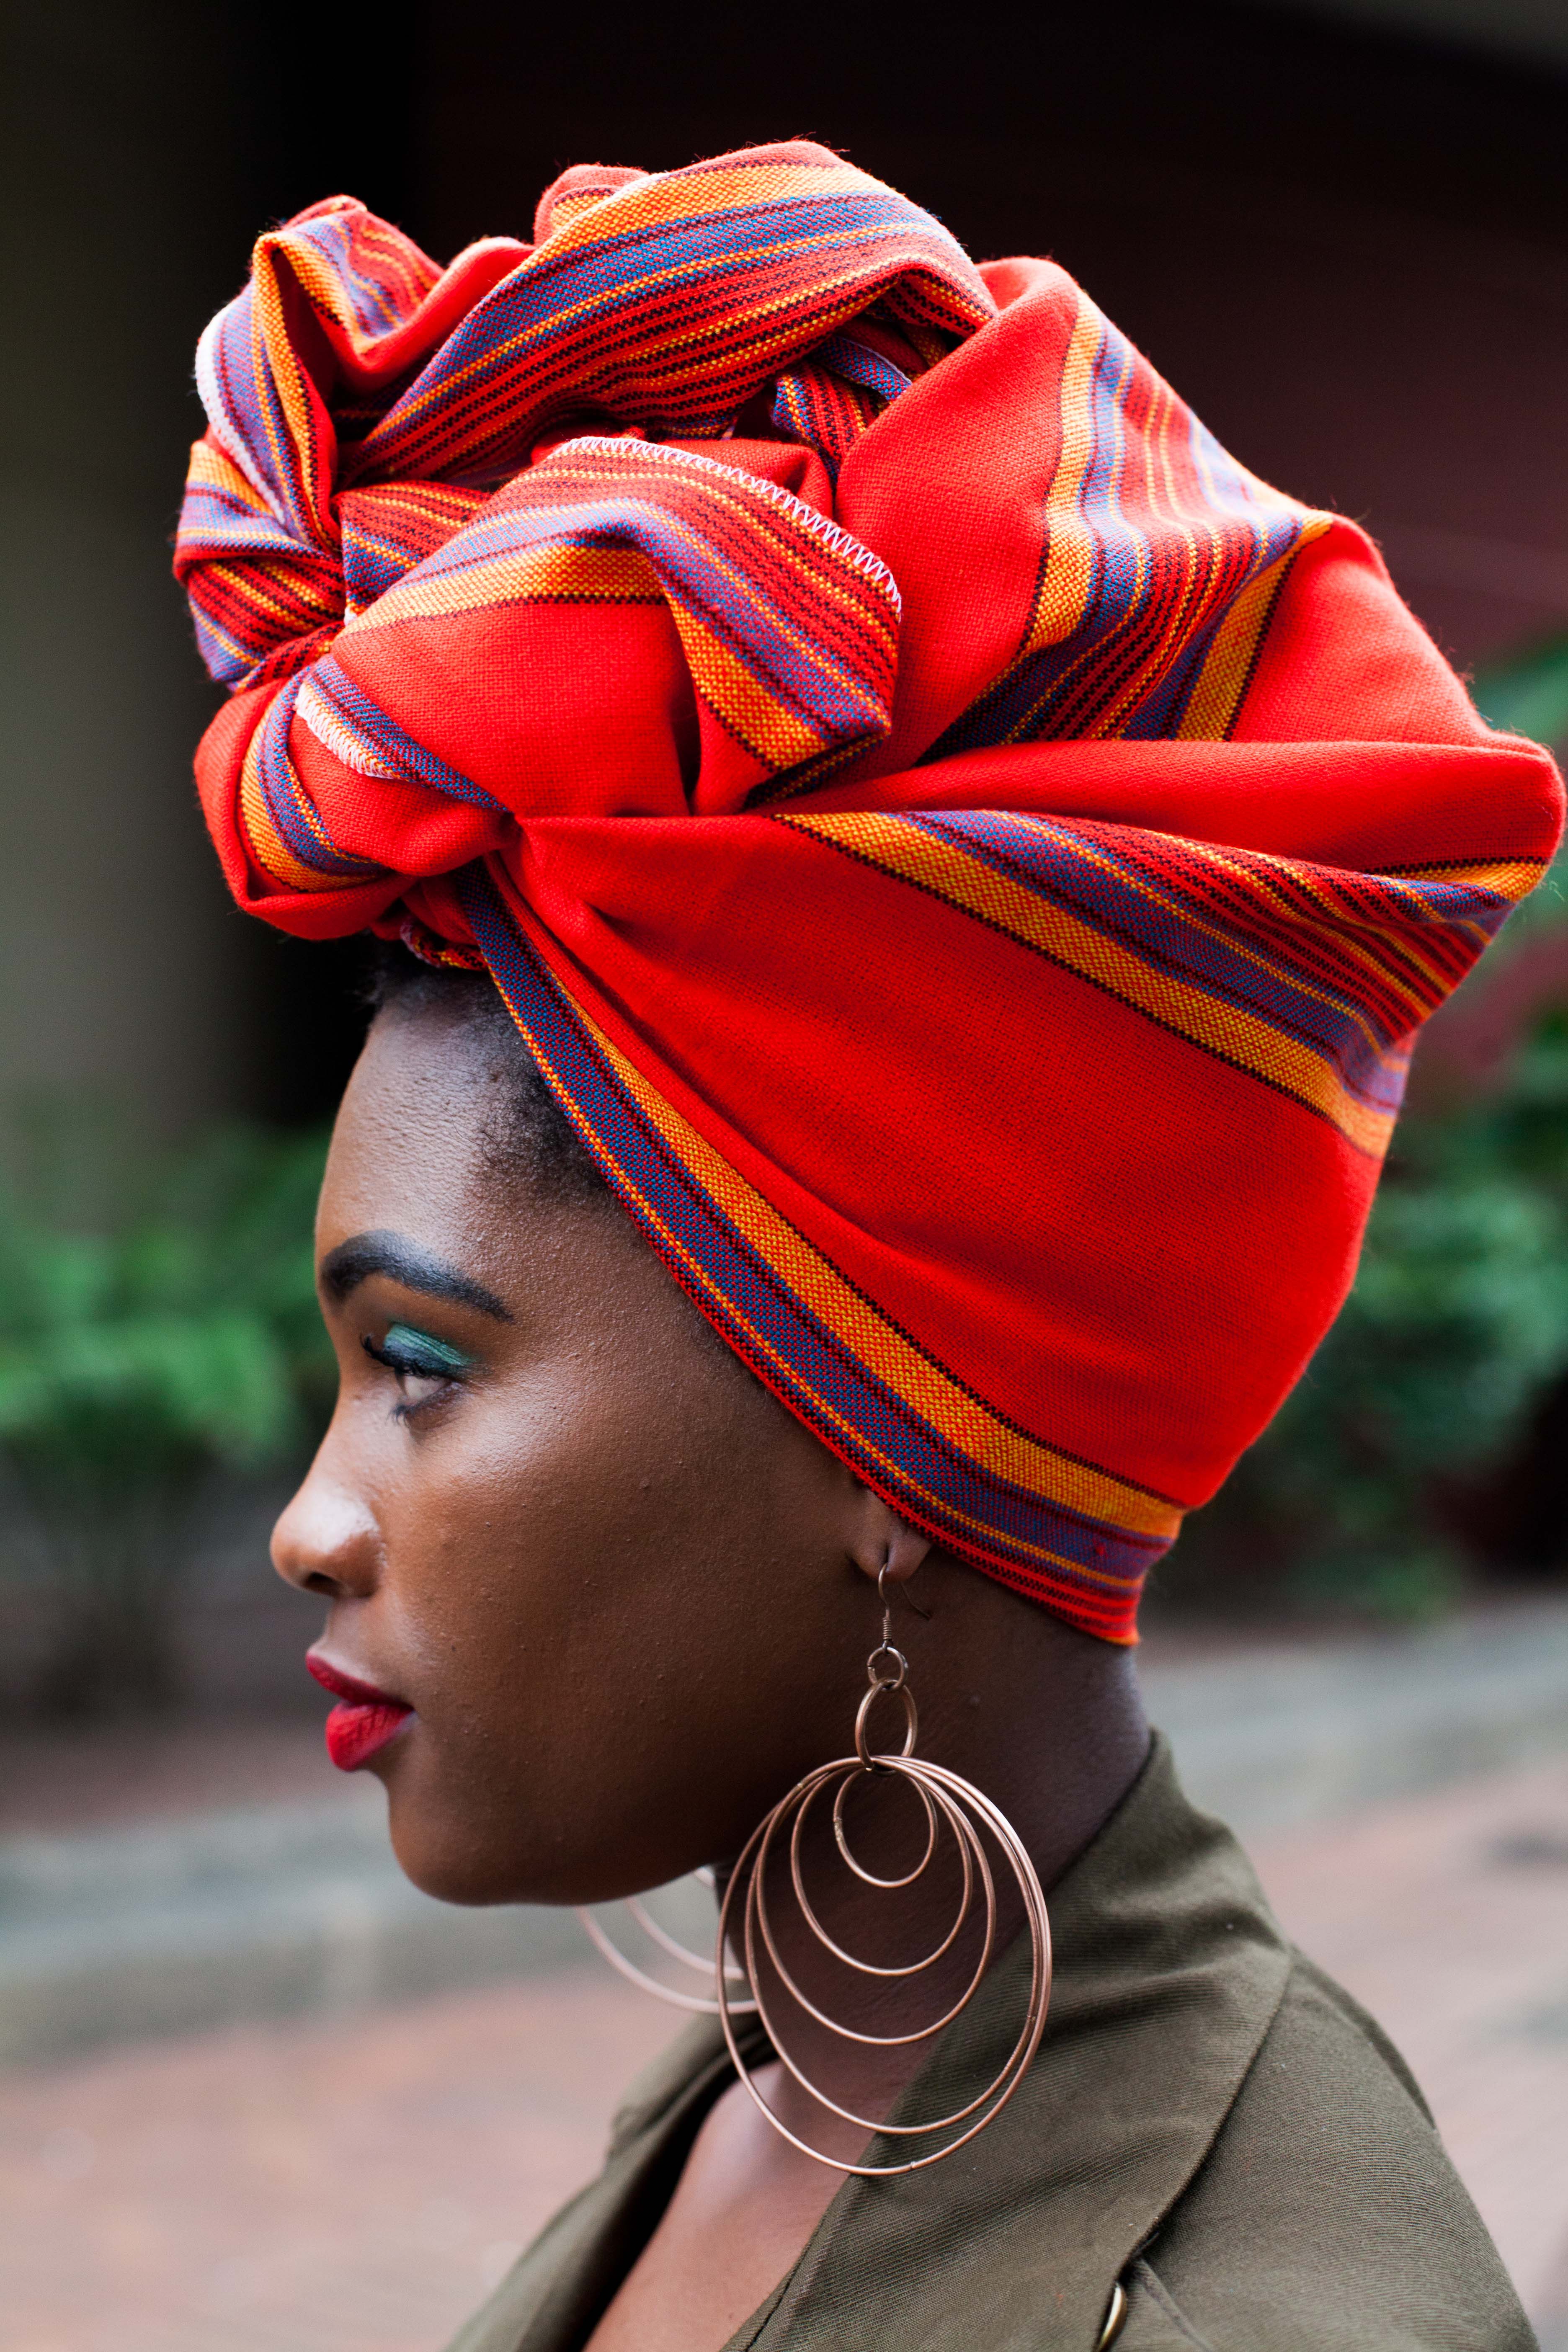 The Most Magnificent Street Style Accessories From Essence Festival Durban
